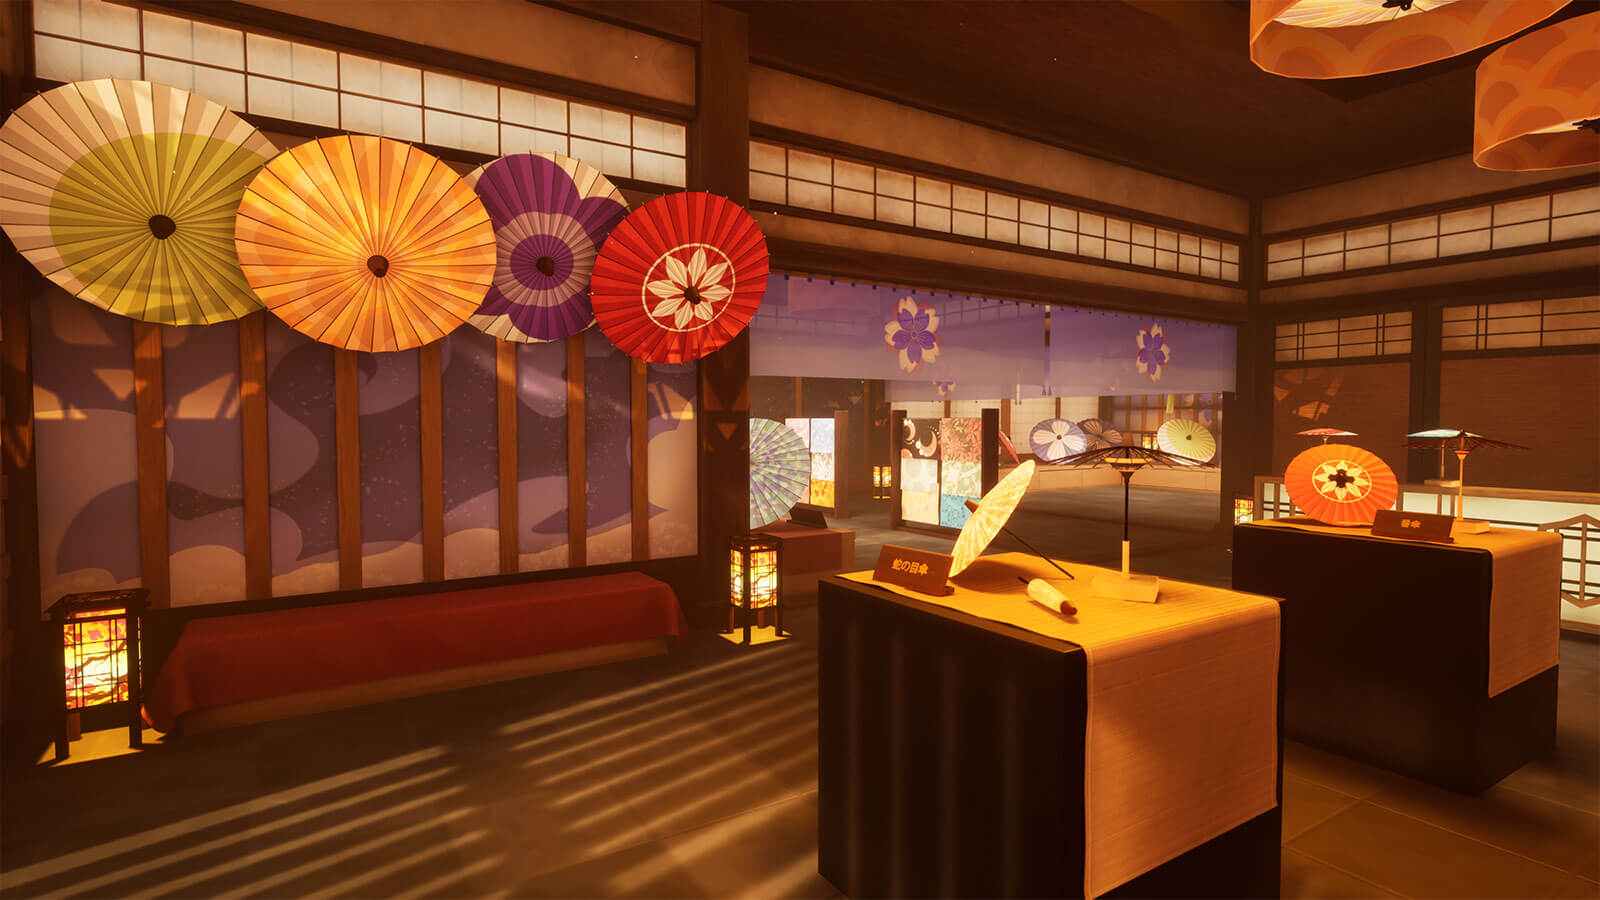 Corner view of a traditional Japanese room with various colorful umbrellas 